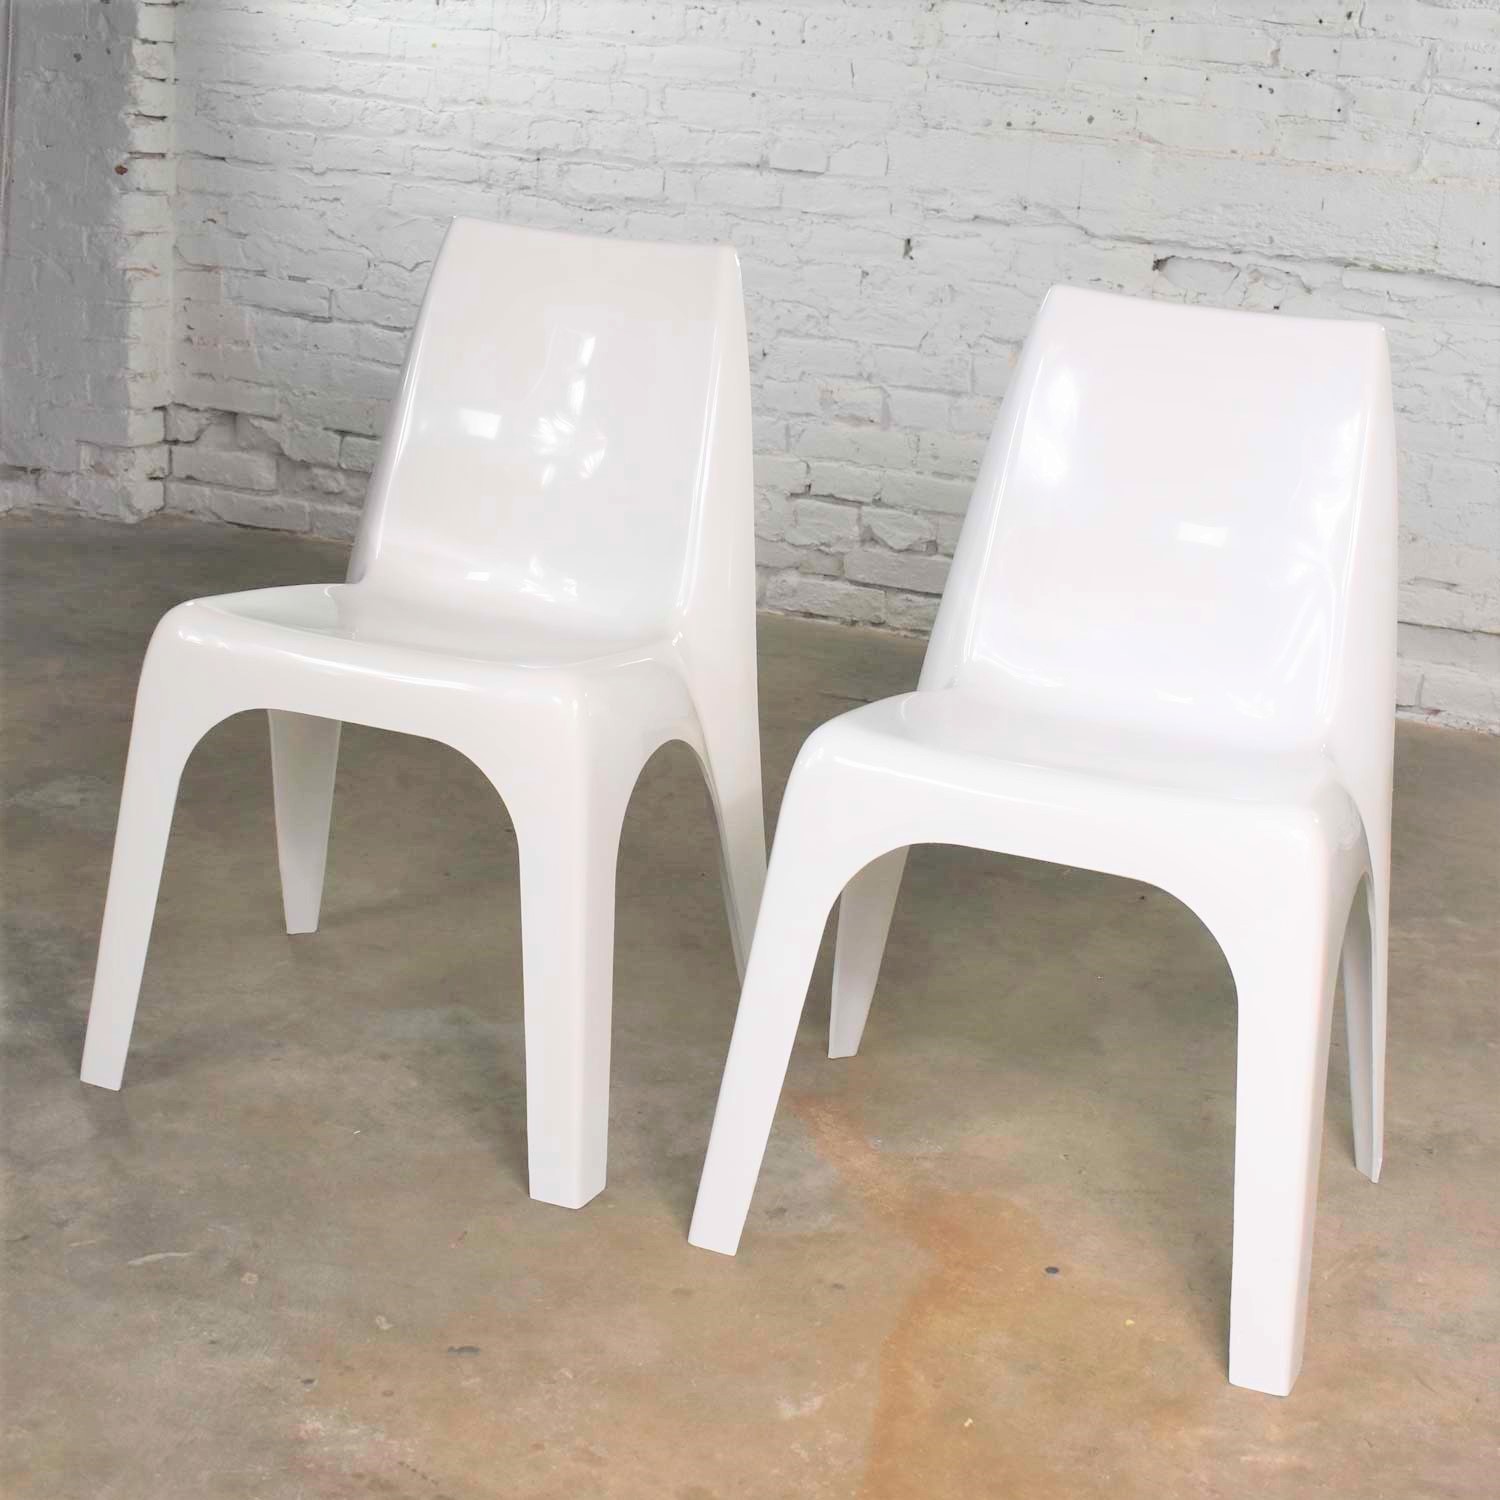 Pair Vintage Modern White Molded Plastic Chairs Style of Kartell 4850 by Castiglioni et al